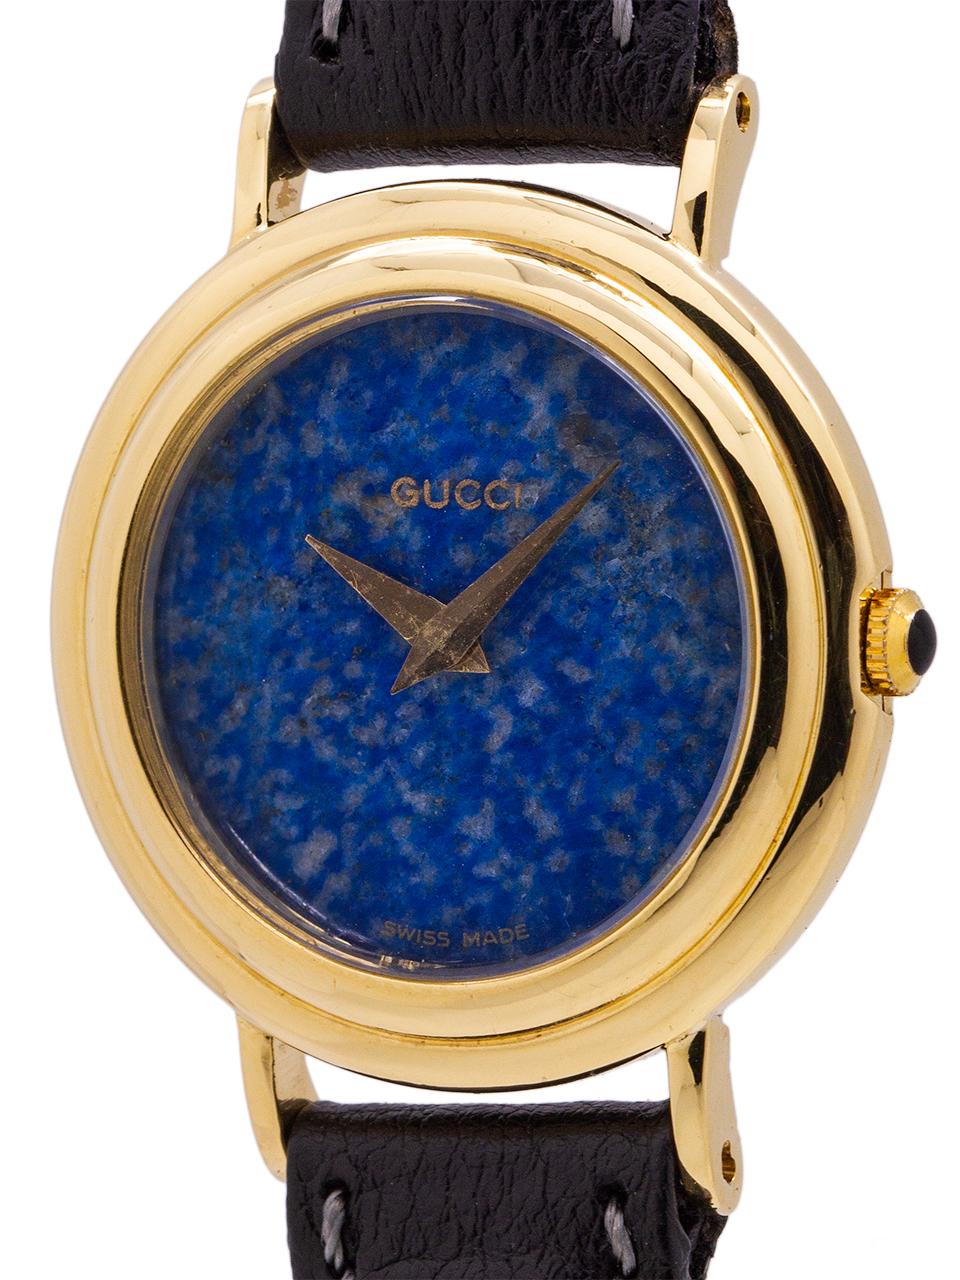 
Seldom seen ladies Gucci watch in 18k yellow gold, with beautiful blue lapis dial, circa 1980’s. Featuring an interesting stepped bezel 25mm case, with black inlaid yellow gold crown. The dial is a beautiful single slab of lapis with only the word